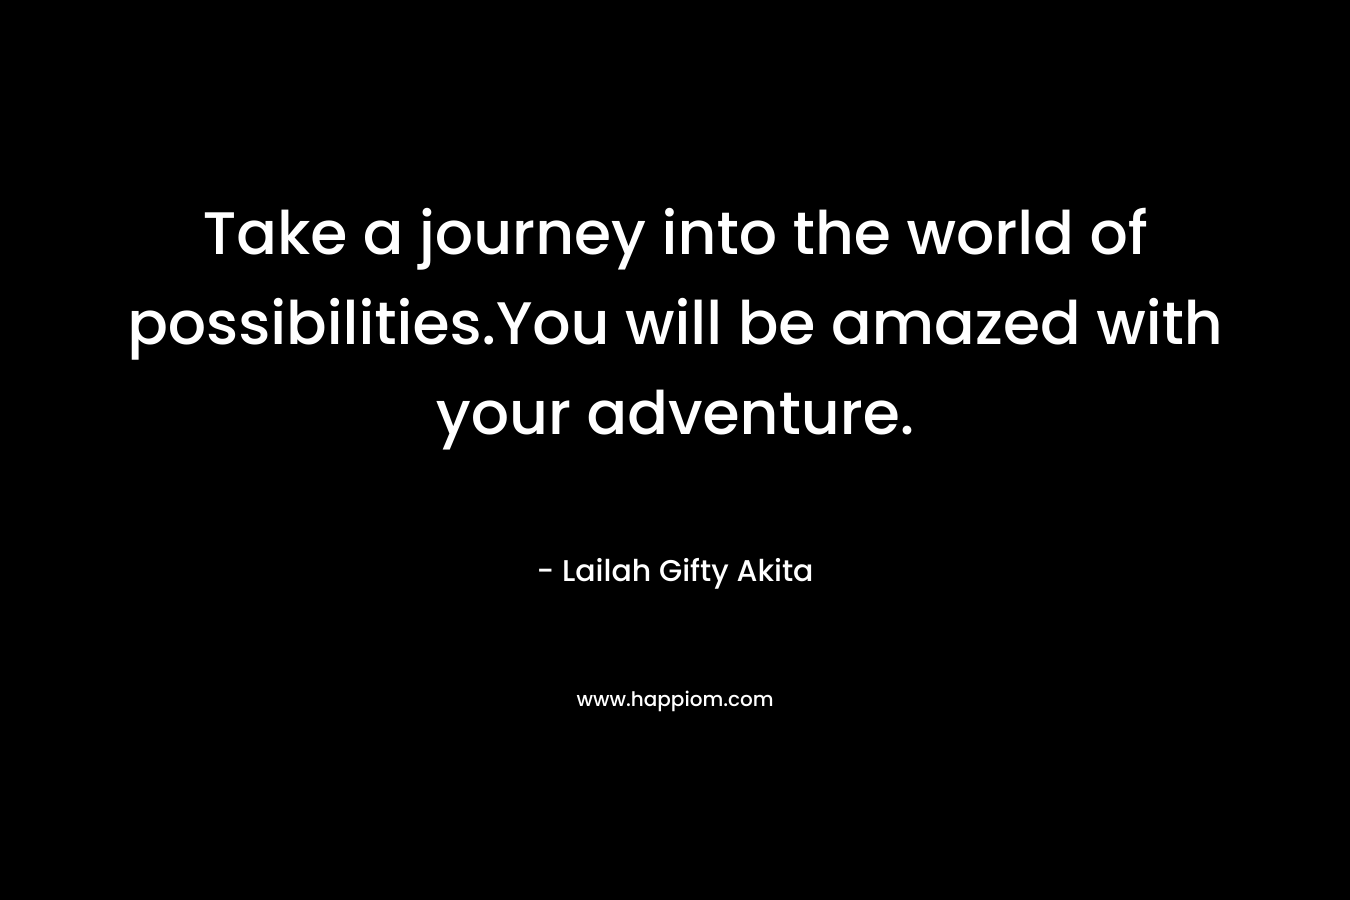 Take a journey into the world of possibilities.You will be amazed with your adventure. – Lailah Gifty Akita